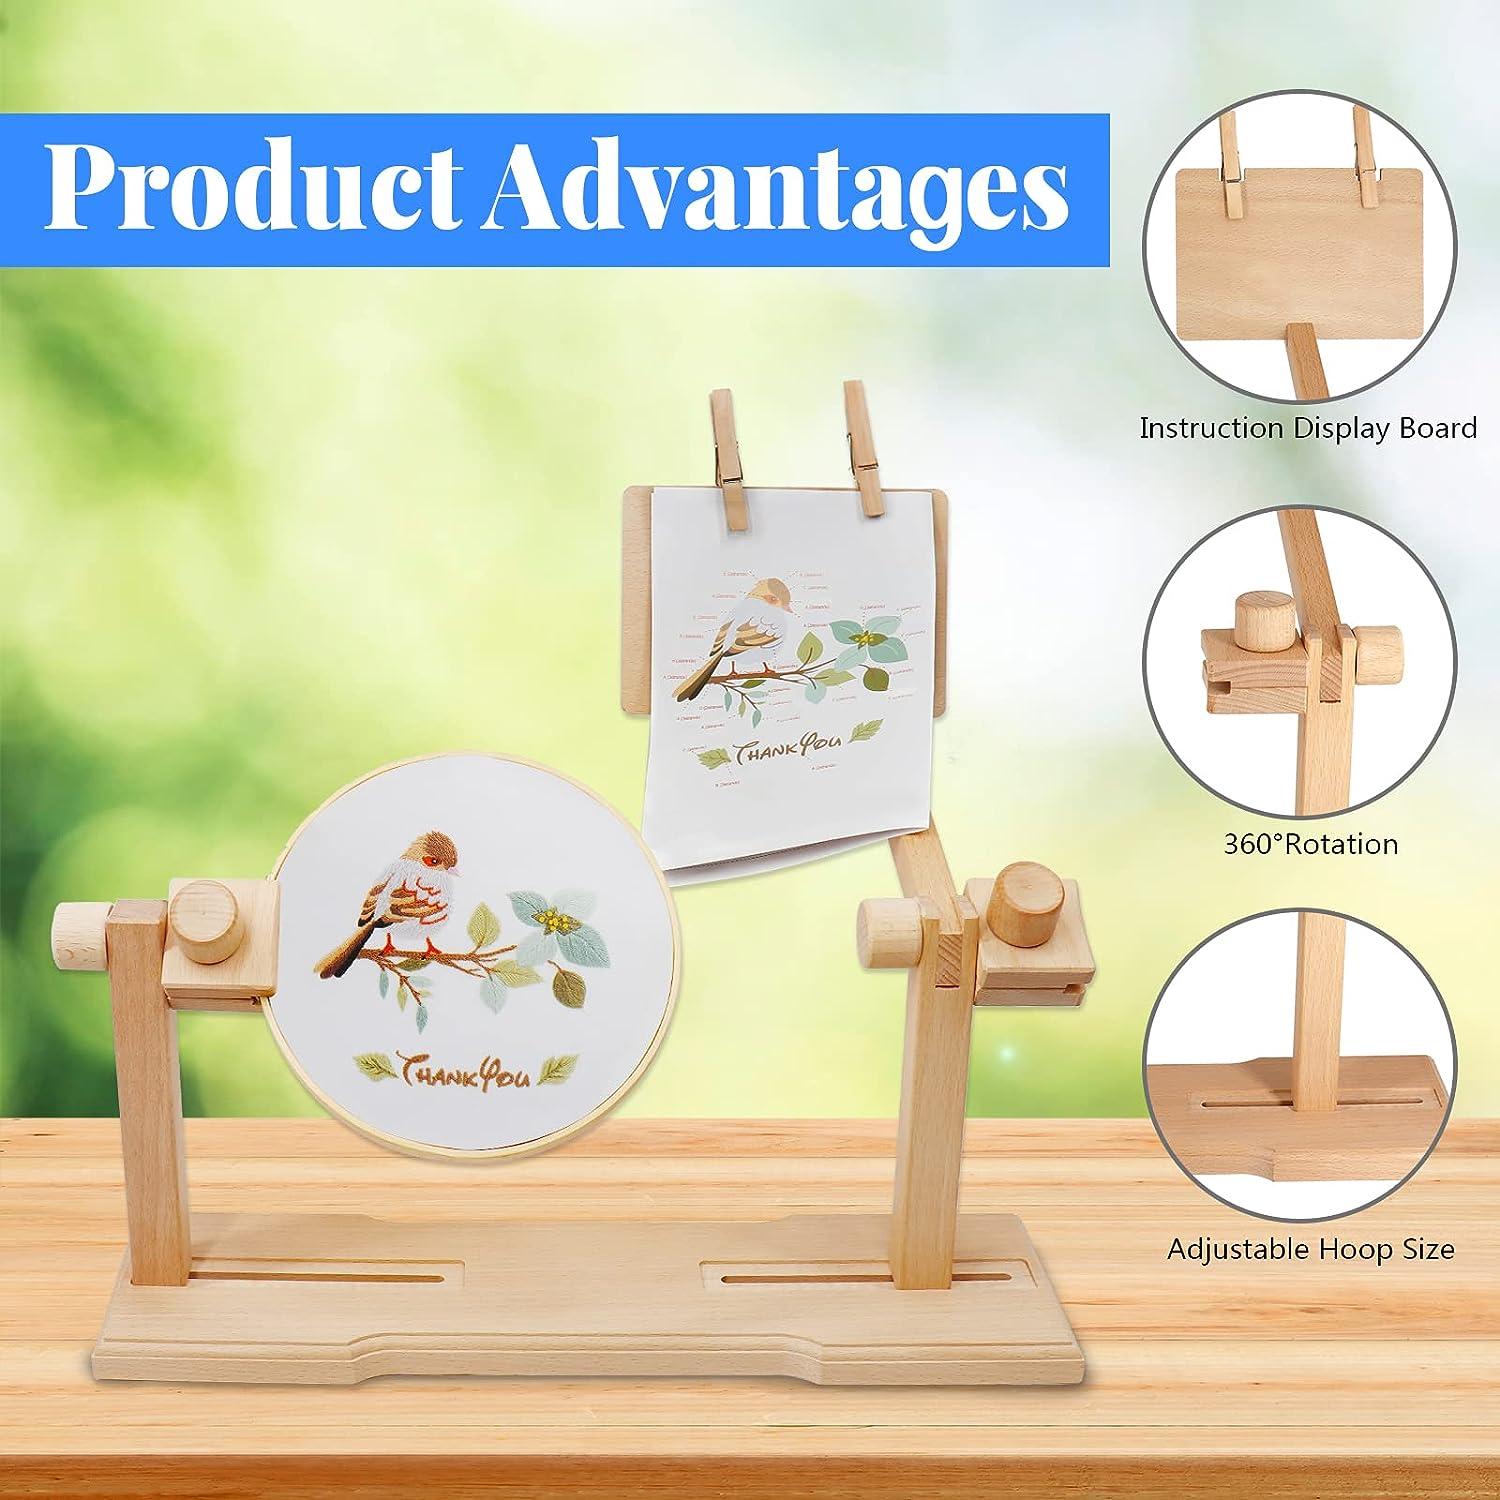 SolidGnik Embroidery Stand,Adjustable Embroidery Hoop Holder with  Embroidery Kit and 3PCS Embroidery Hoops